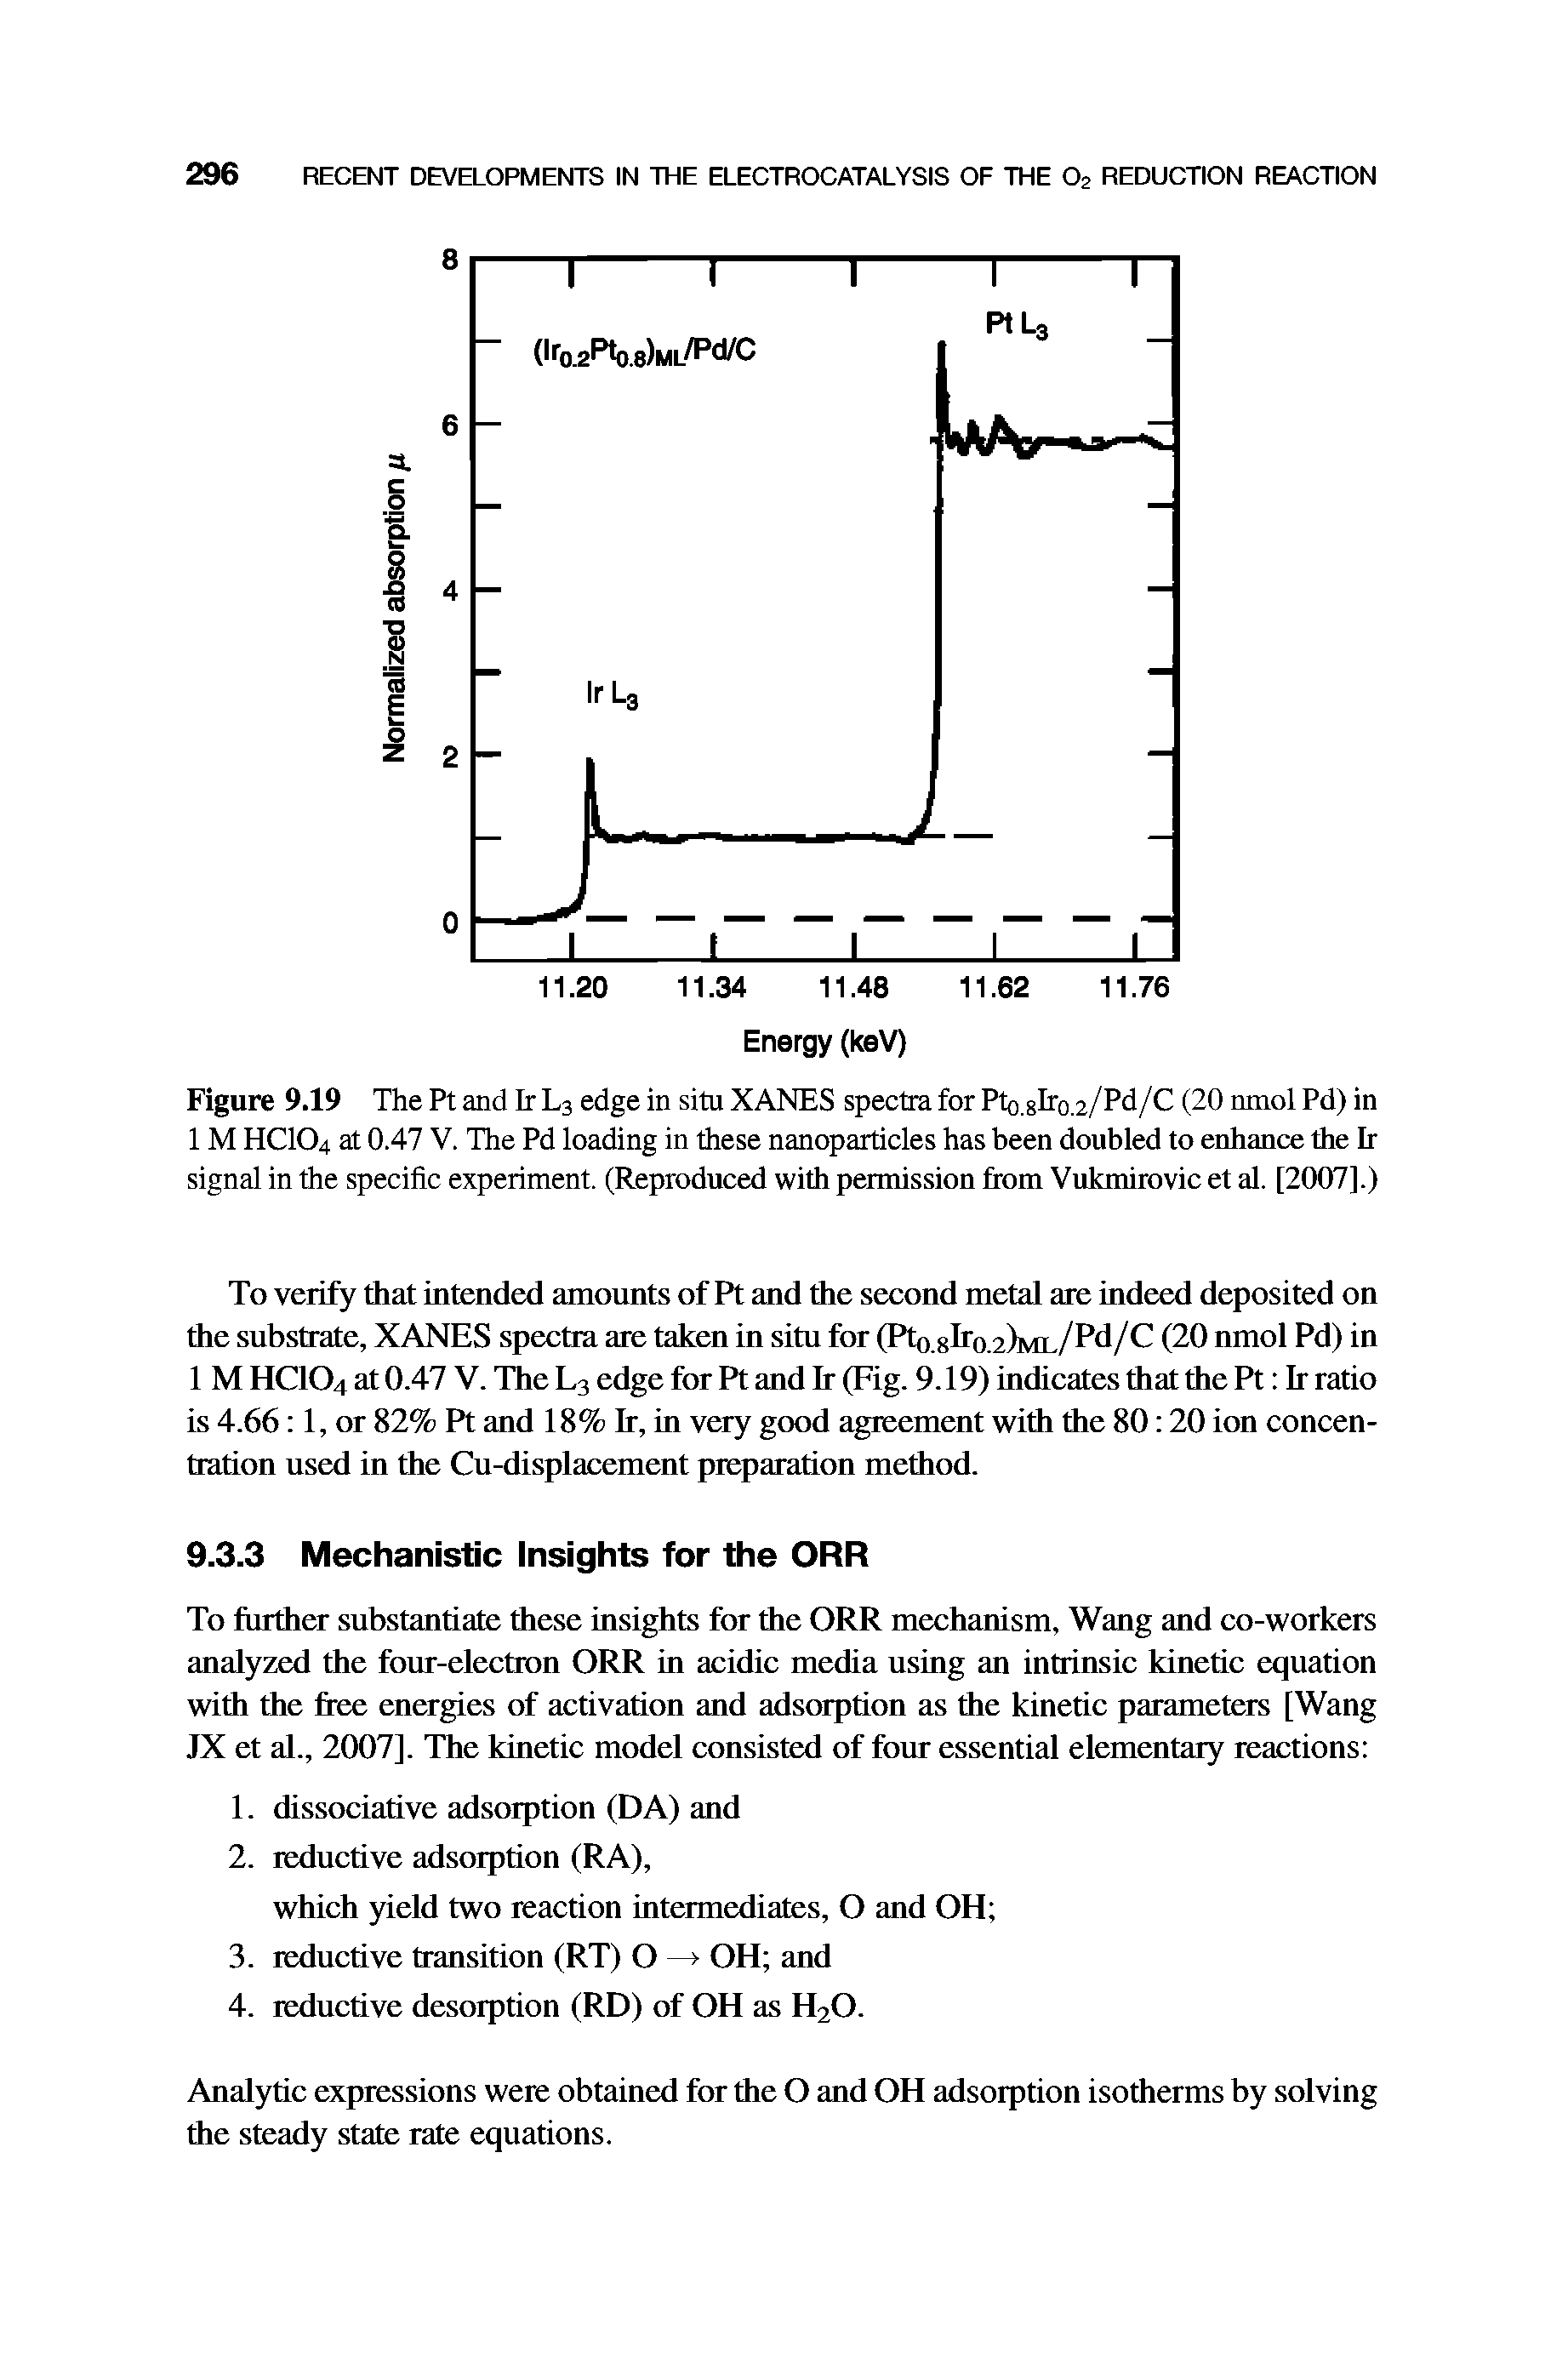 Figure 9.19 The Pt and Ir L3 edge in situ XANES spectra for Pto.8lro.2/Pd/C (20 nmol Pd) in 1 M HCIO4 at 0.47 V. The Pd loading in these nanoparticles has been doubled to enhance the Ir signal in the specific experiment. (Reproduced with permission from Vukmirovic et al. [2007].)...